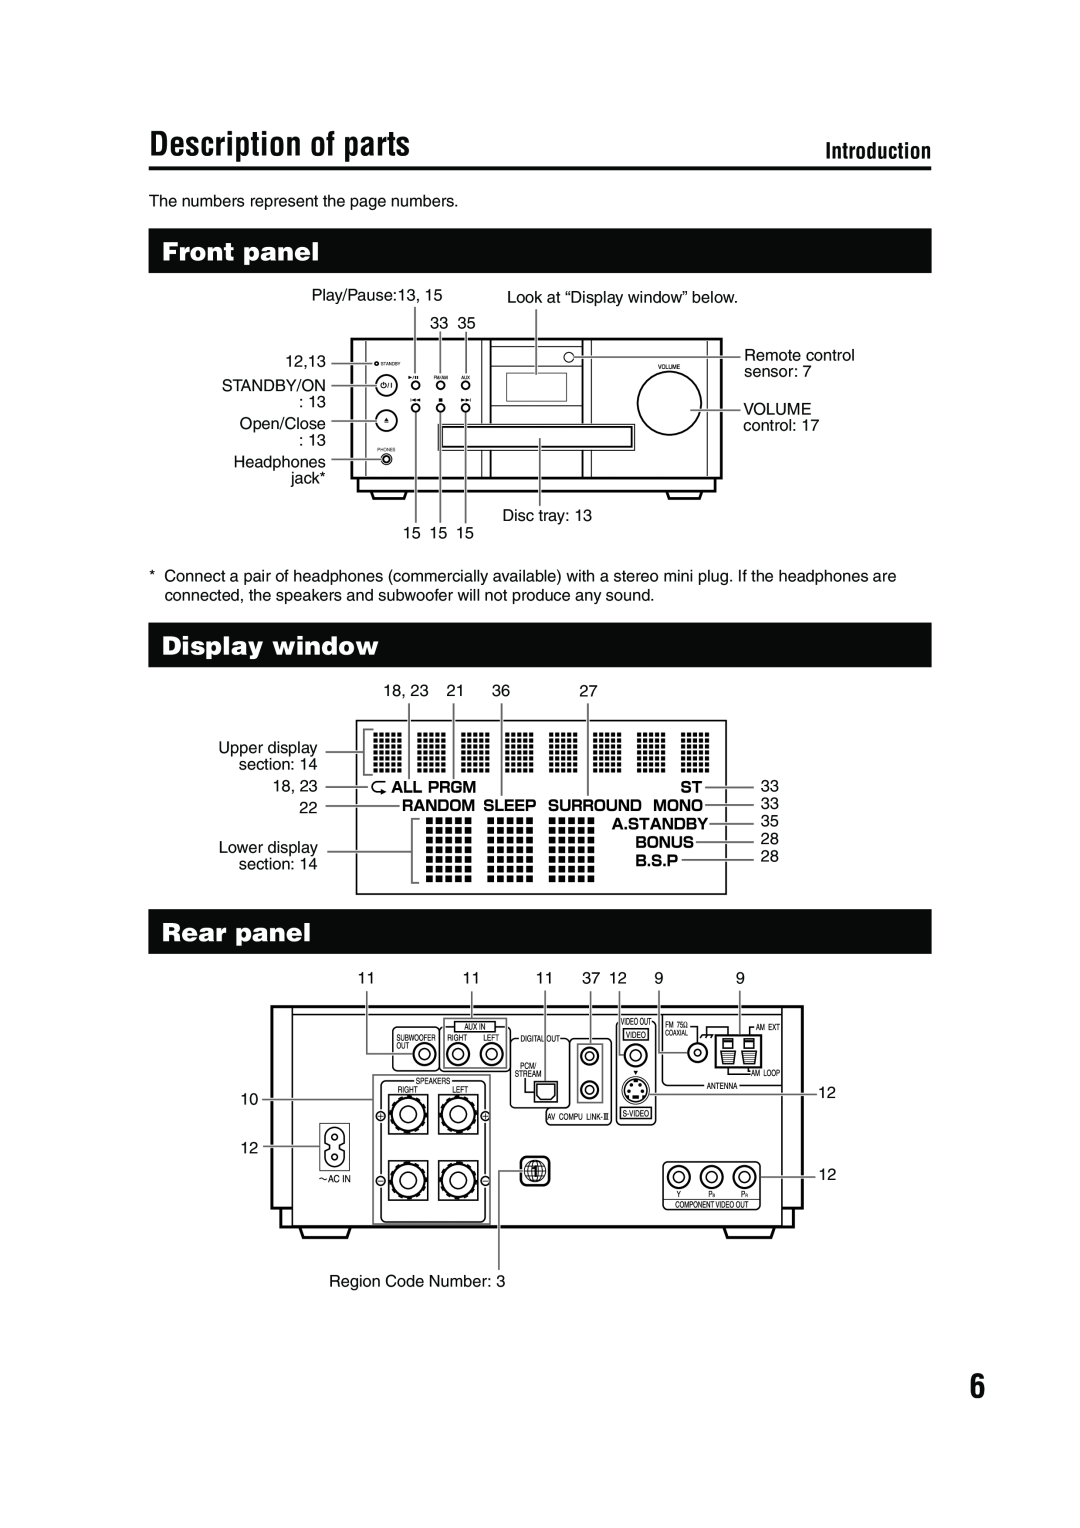 JVC EX-A1 manual Description of parts, Front panel, Display window, Rear panel, Introduction 